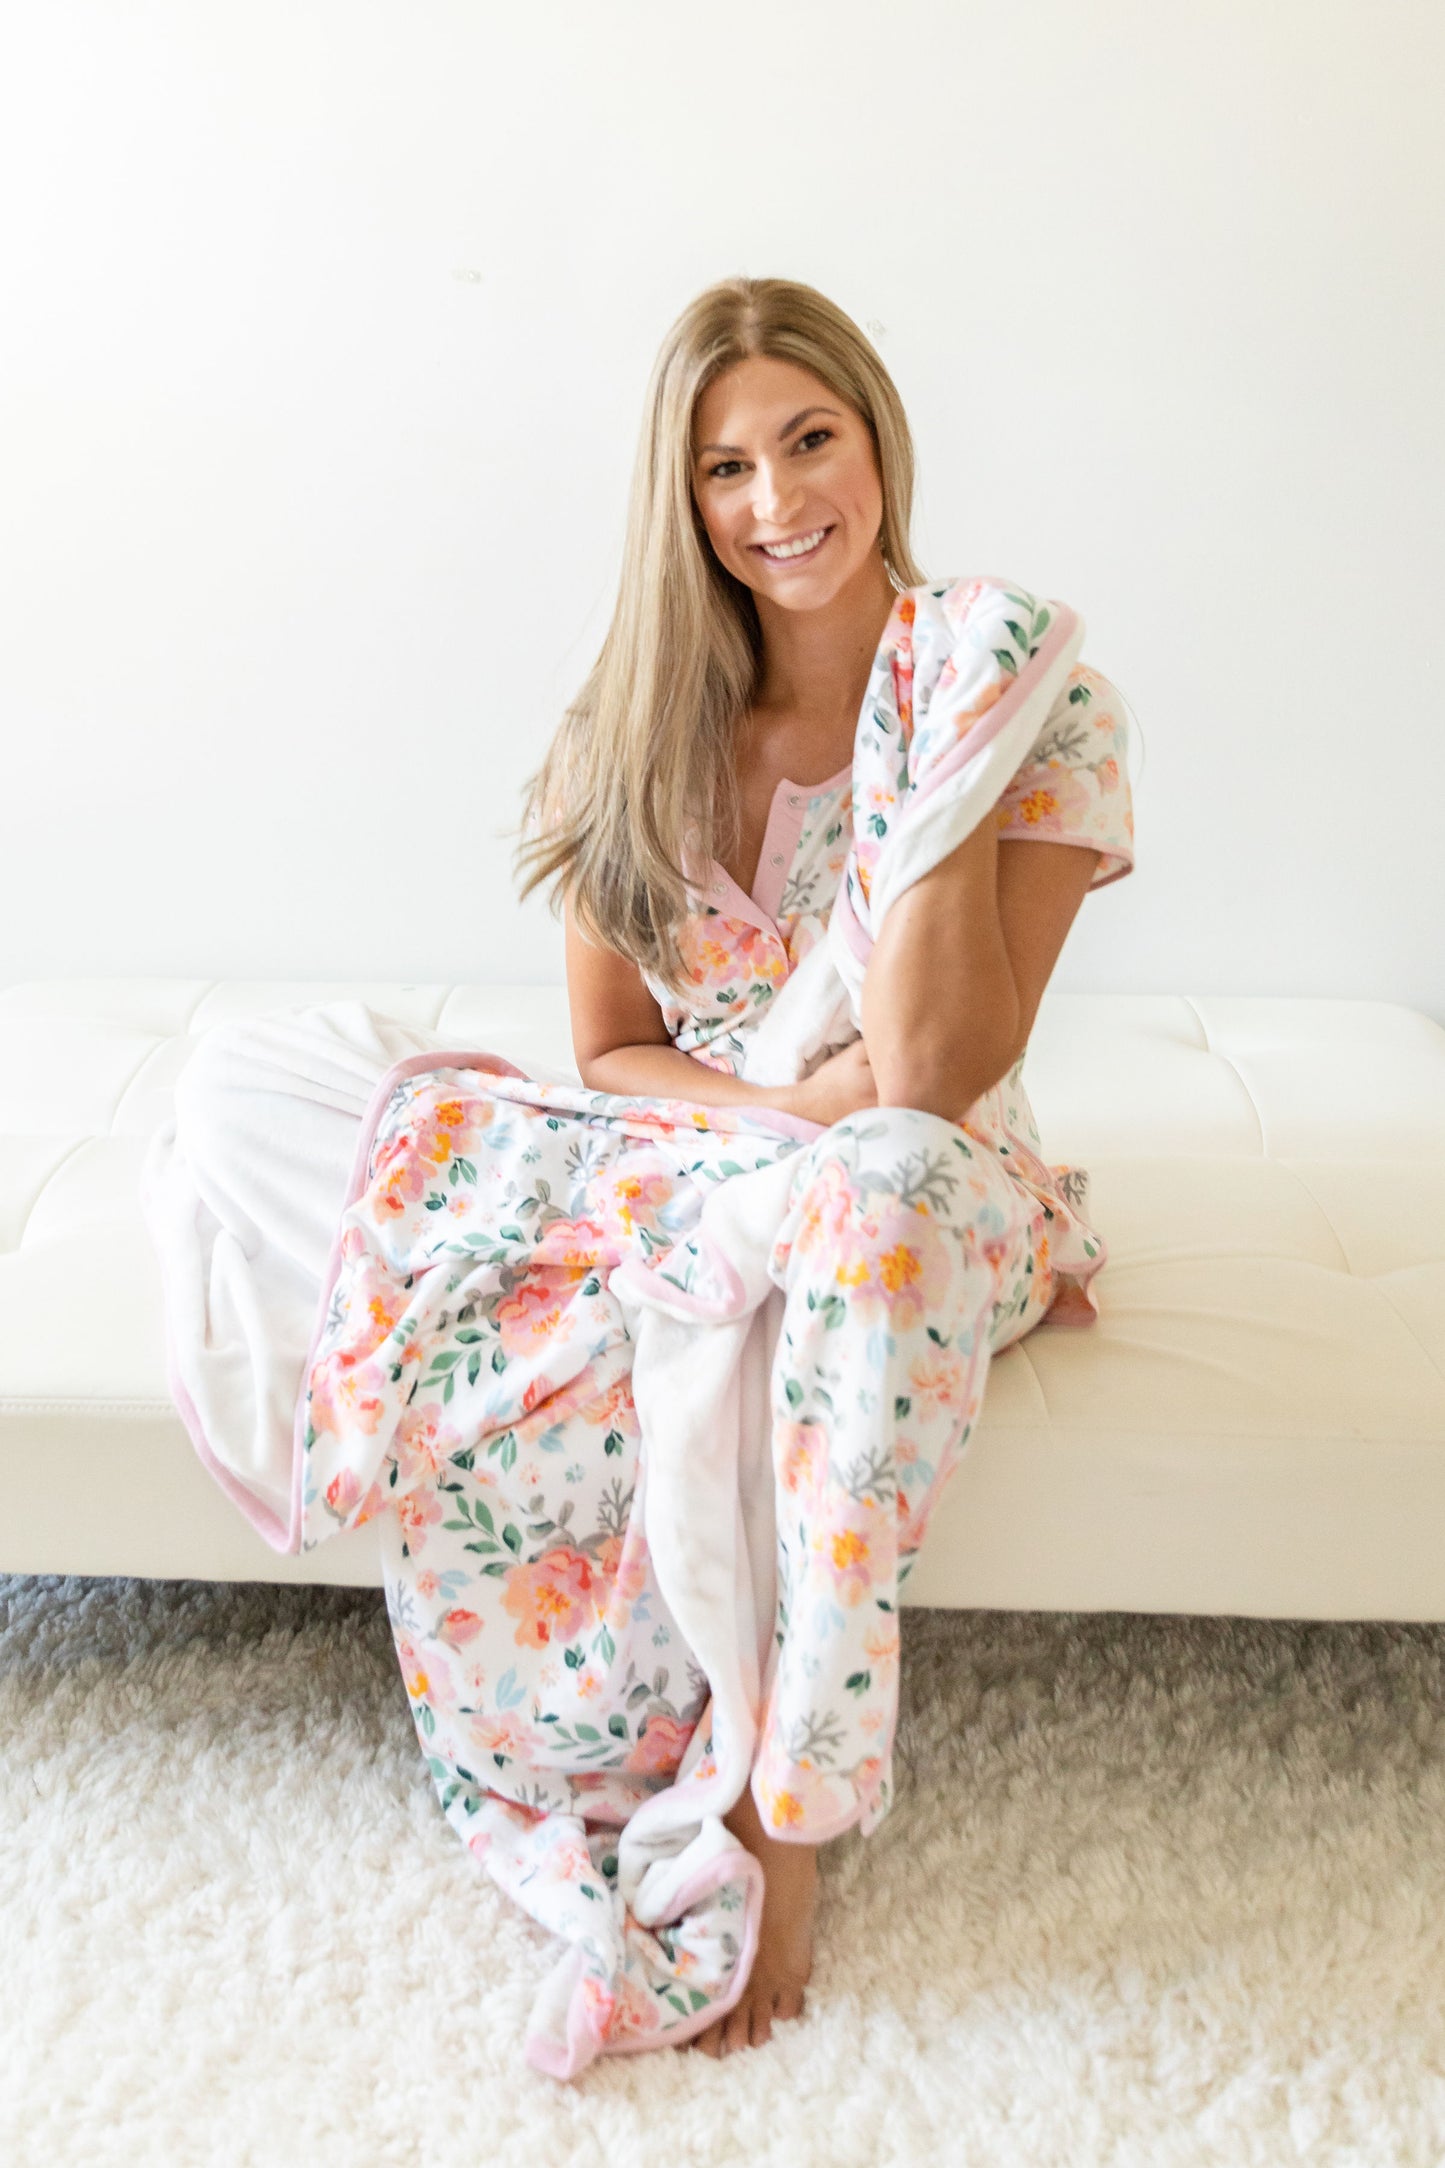 Match your blanket with your pajamas. Featuring the Mila print at babybeminematernity. Adorable maternity photoshoot. Ready to ship. Get your hospital bag ready with coordinating outfits, swaddles, and adult size minky blanket. Choose your print and get lounging.